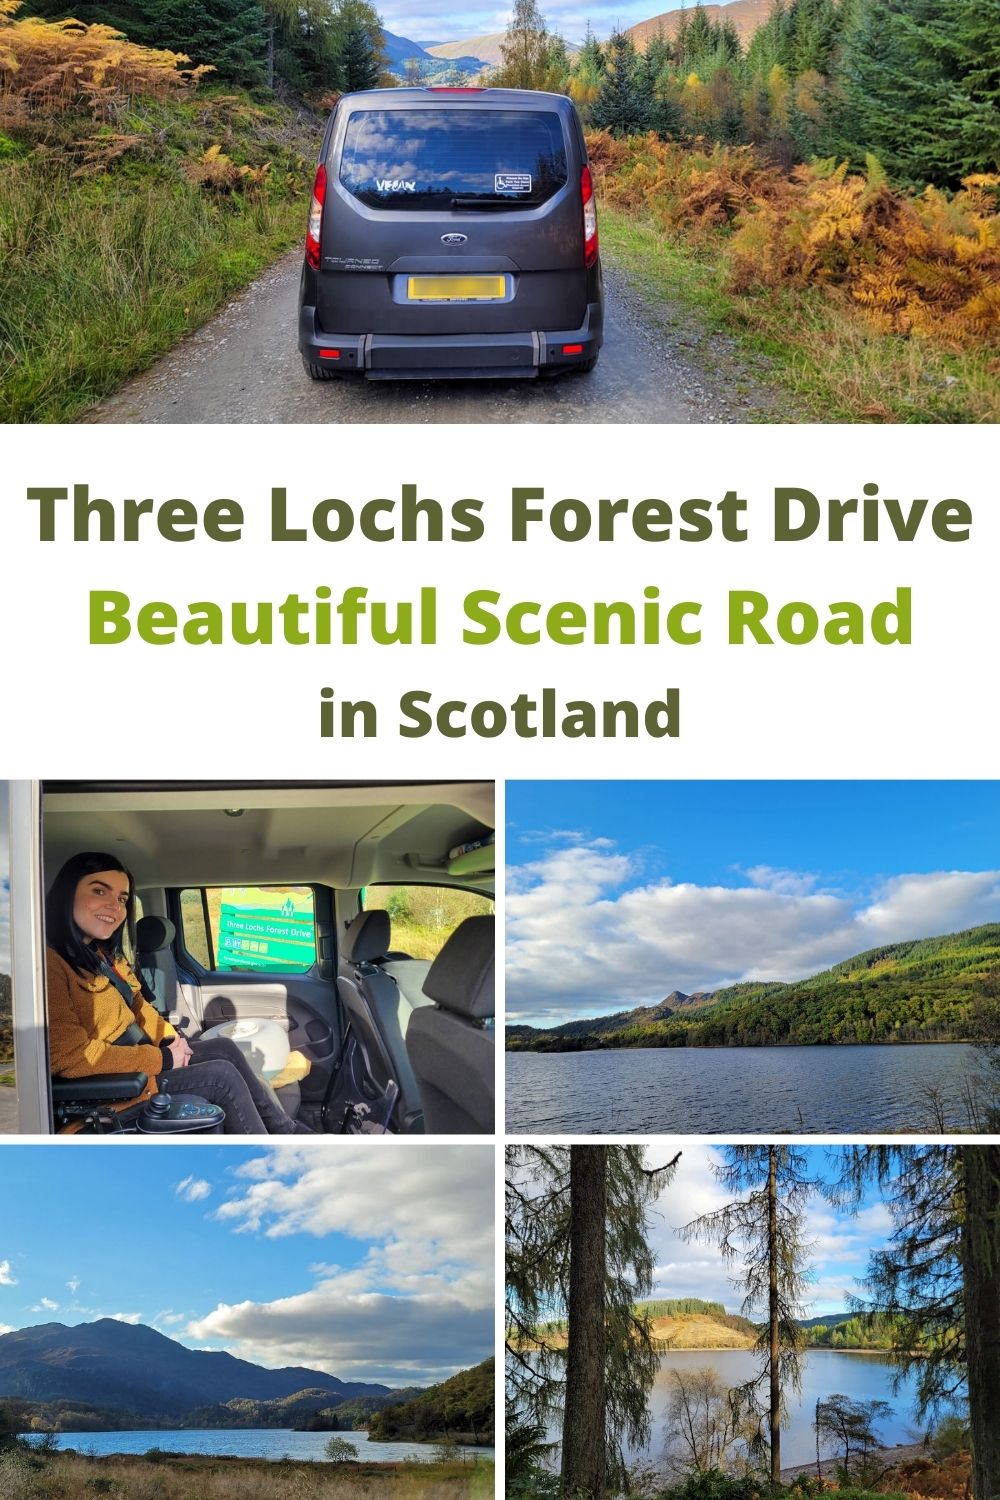 A selection of images from Three Lochs Forest Drive